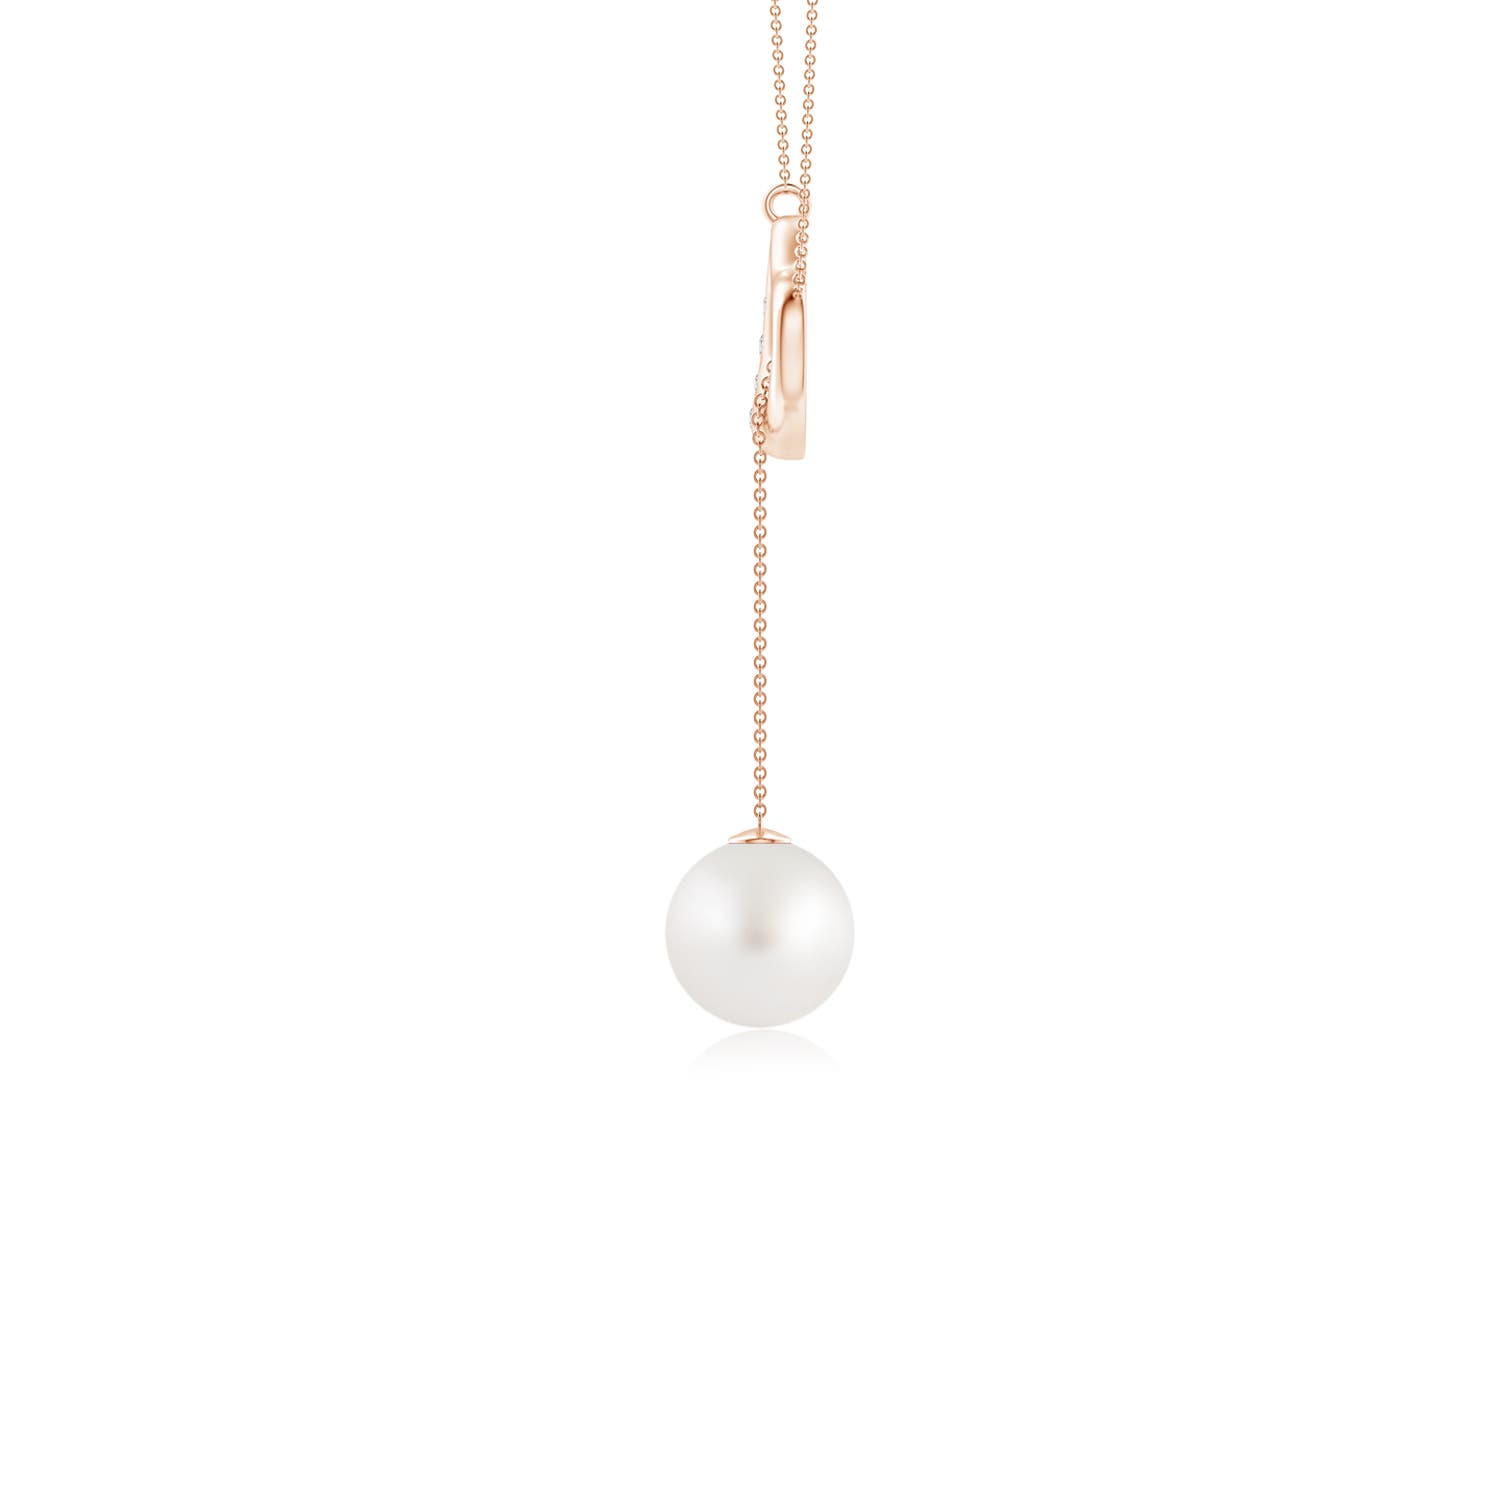 AA - South Sea Cultured Pearl / 3.73 CT / 14 KT Rose Gold